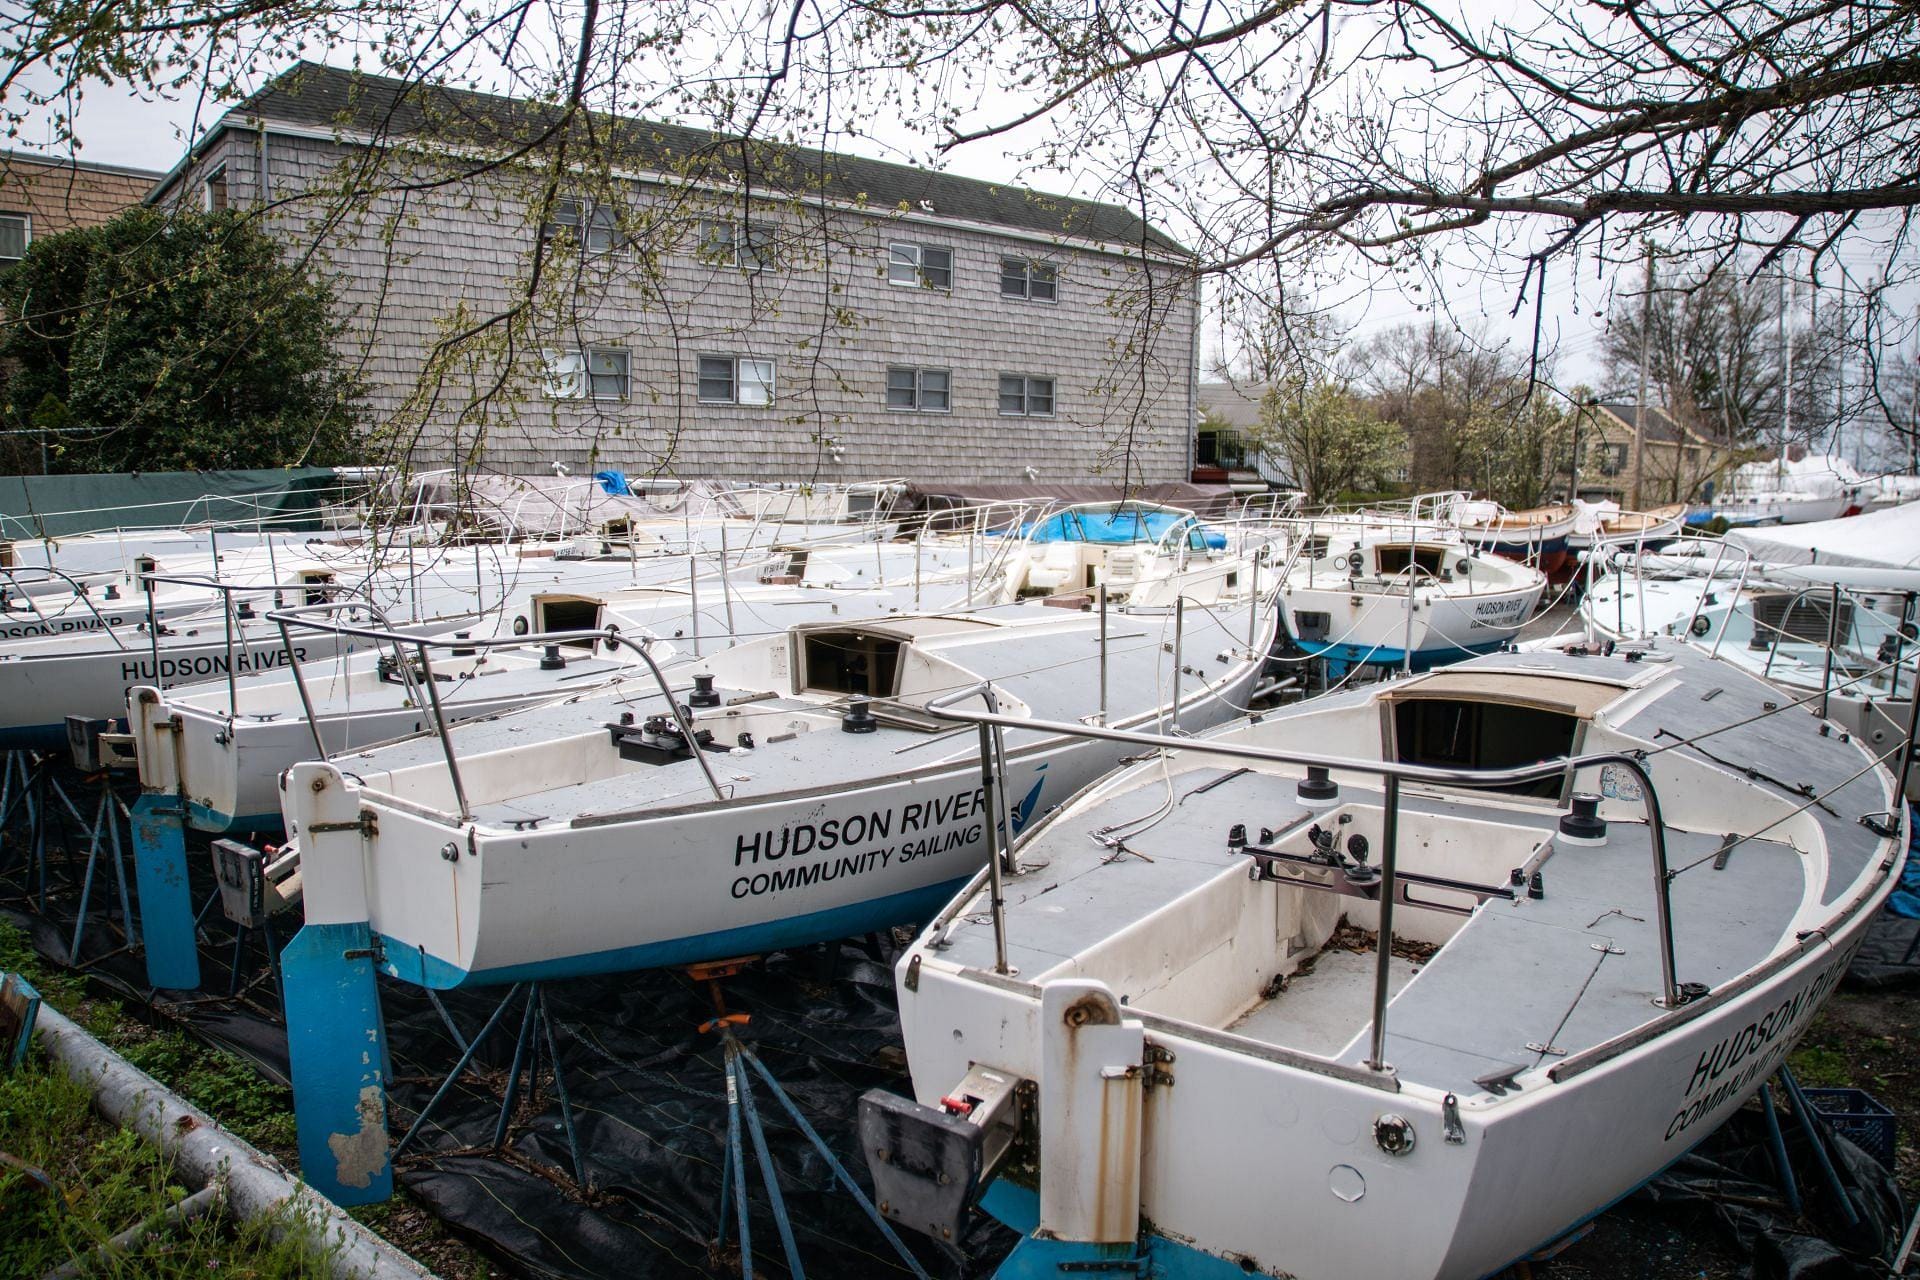 Gov. Cuomo Announces Marinas In New York State Can Open For Personal Use